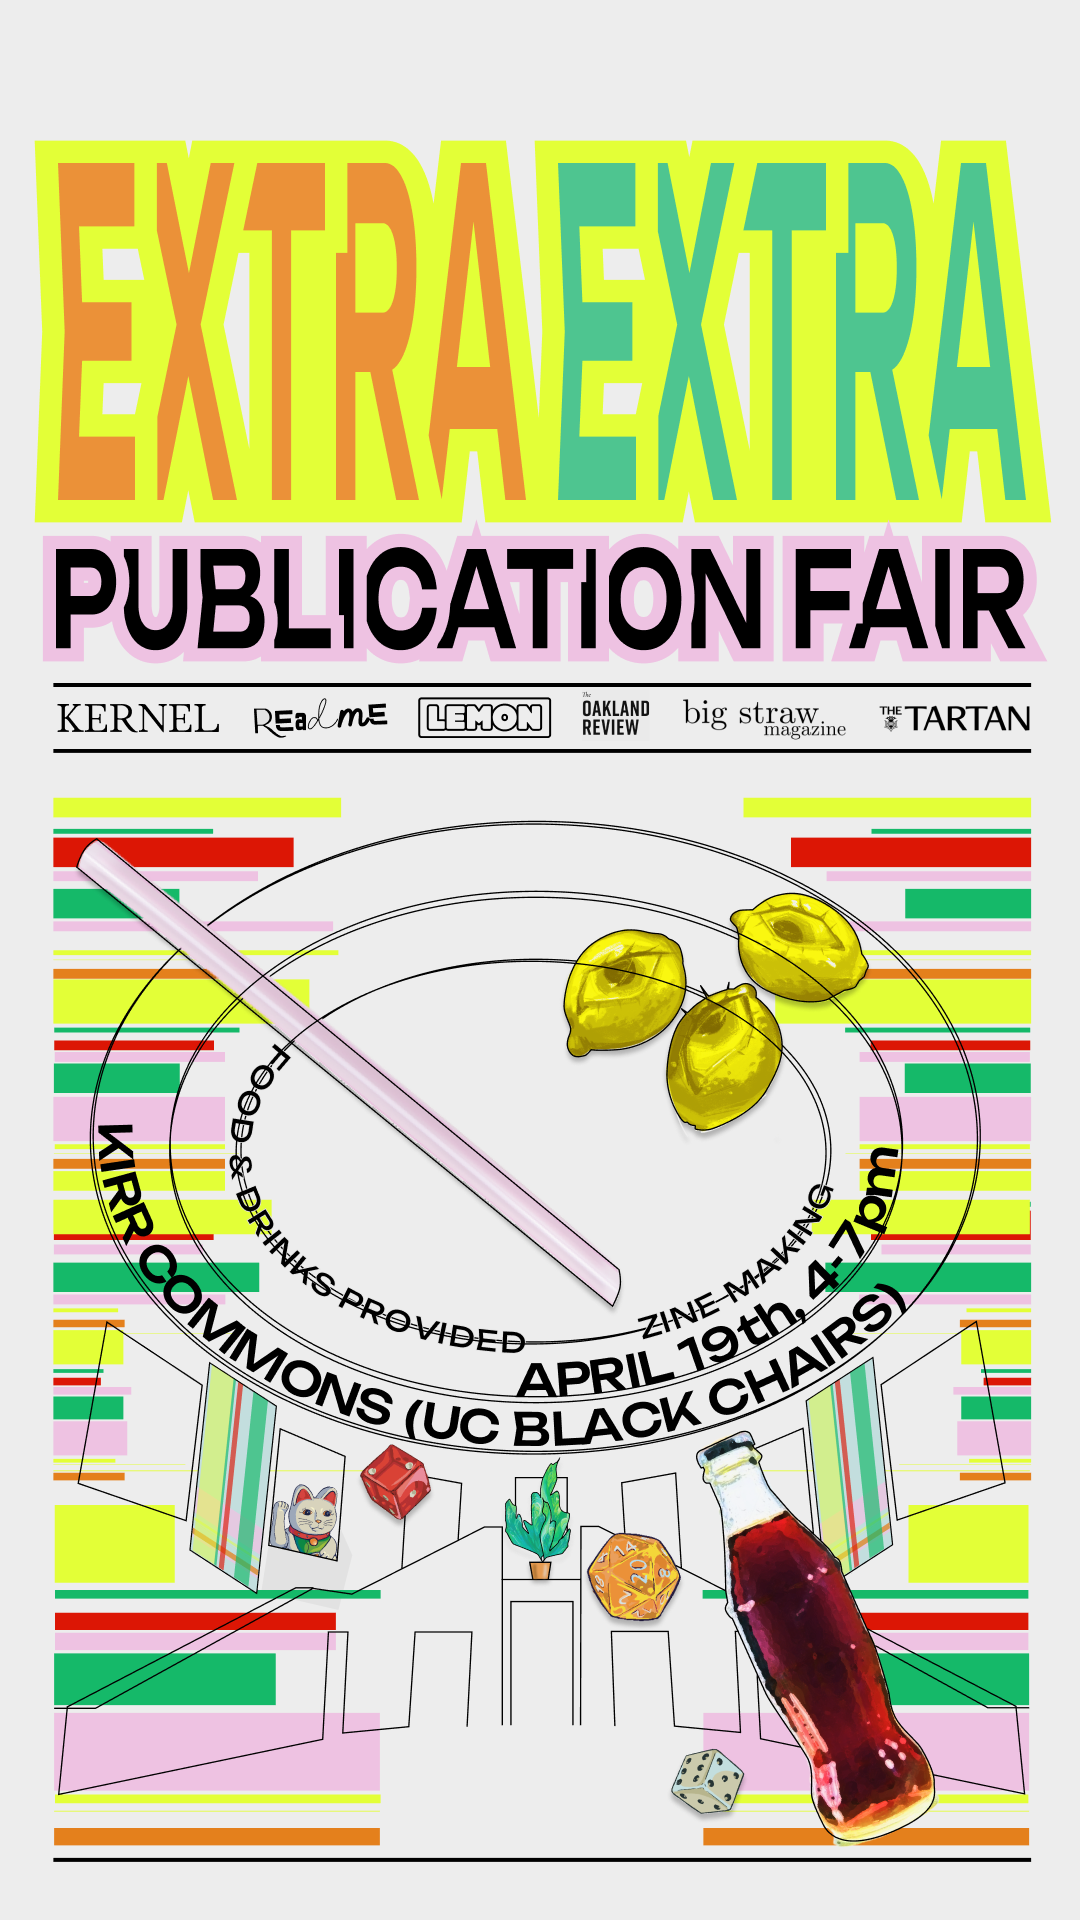 Poster for the Extra Extra Publication Fair